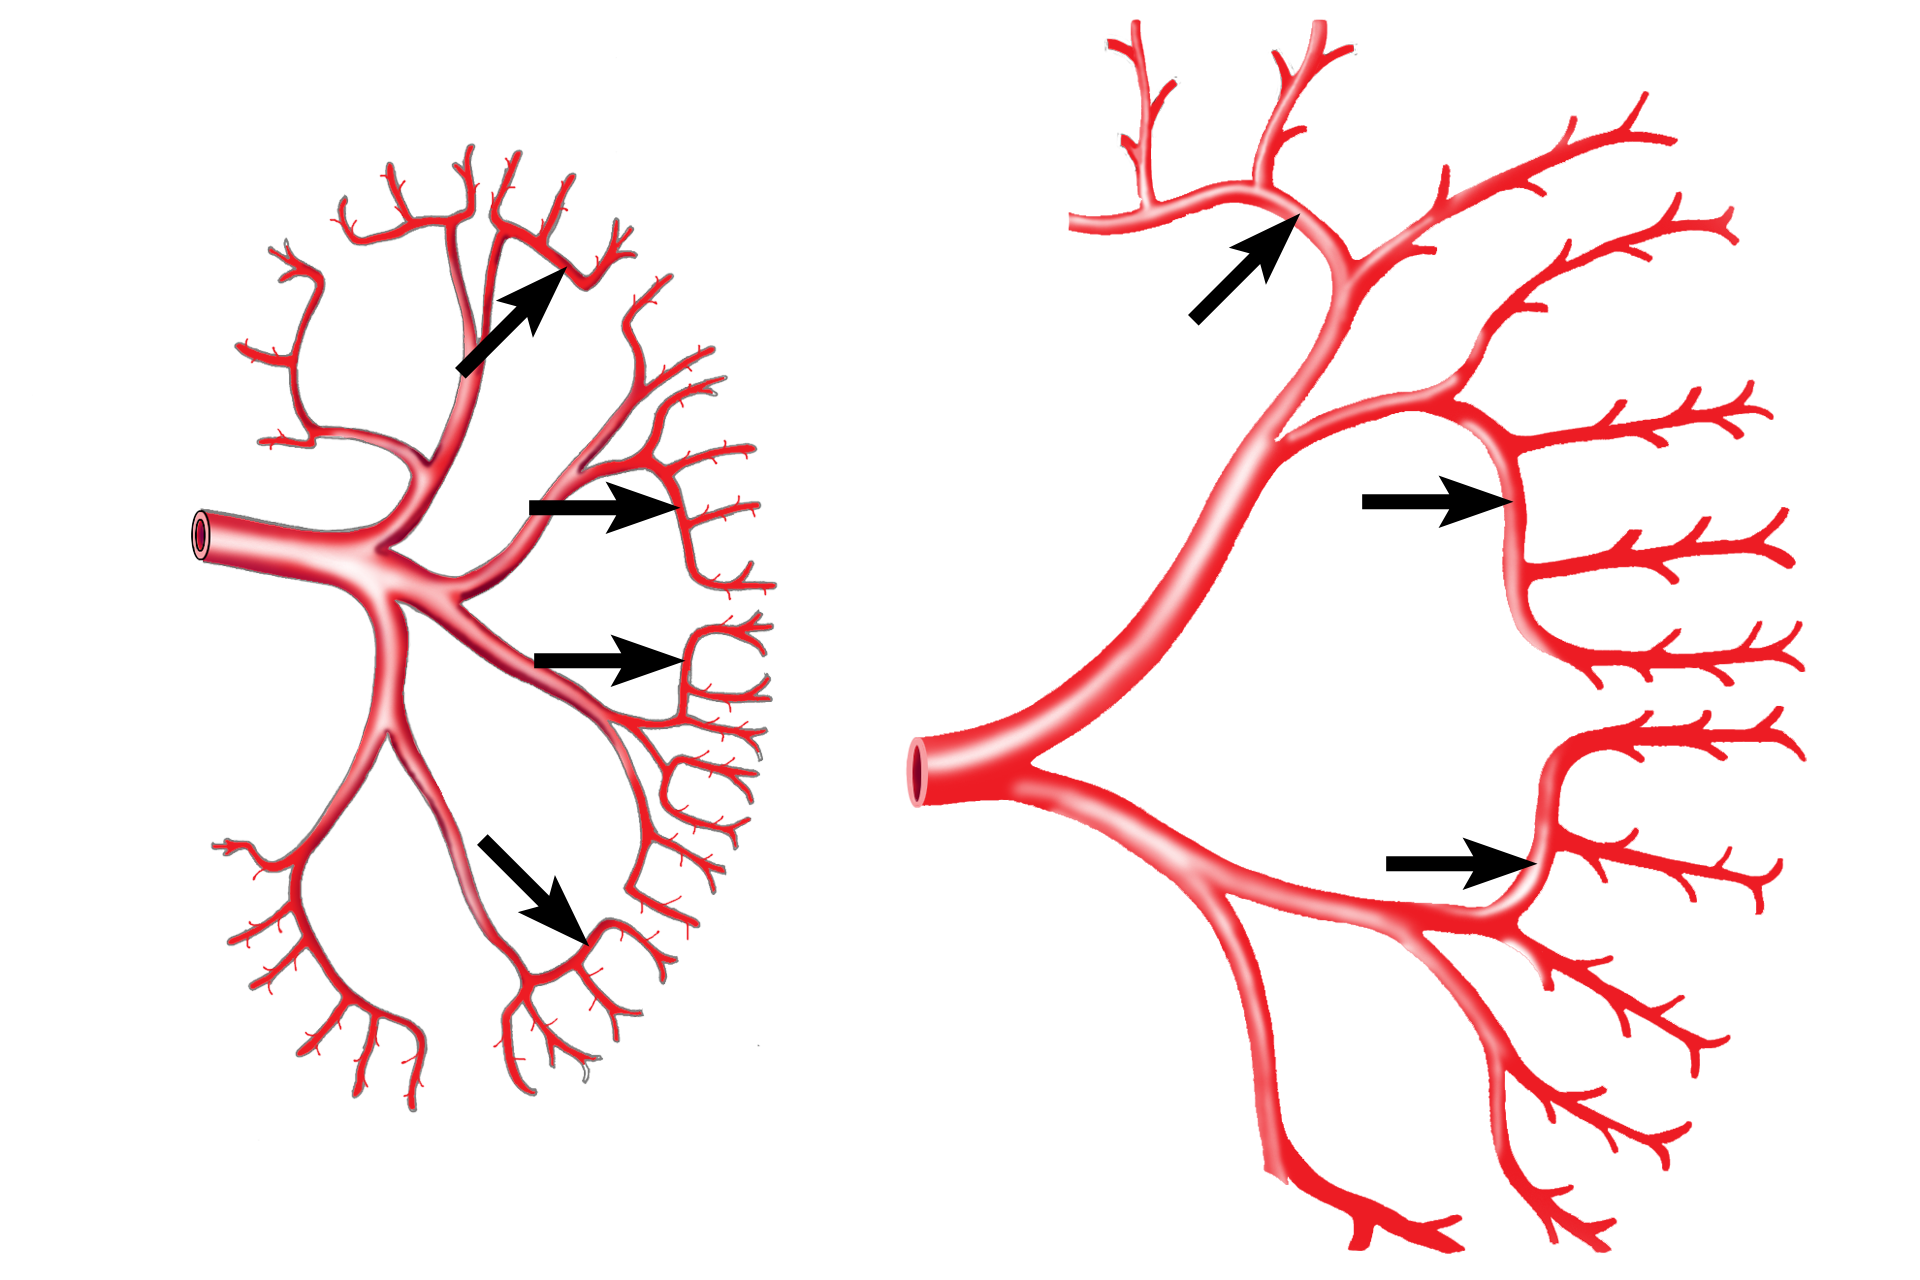  - Arcuate artery <p>When the renal artery enters the kidney, it branches into interlobar arteries, which travel between the pyramids through the renal columns. These arteries branch laterally to form the arcuate vessels that mark the boundary between cortex and medulla. Interlobular arteries leave the arcuates to enter the convoluted portions of the cortex.</p>
